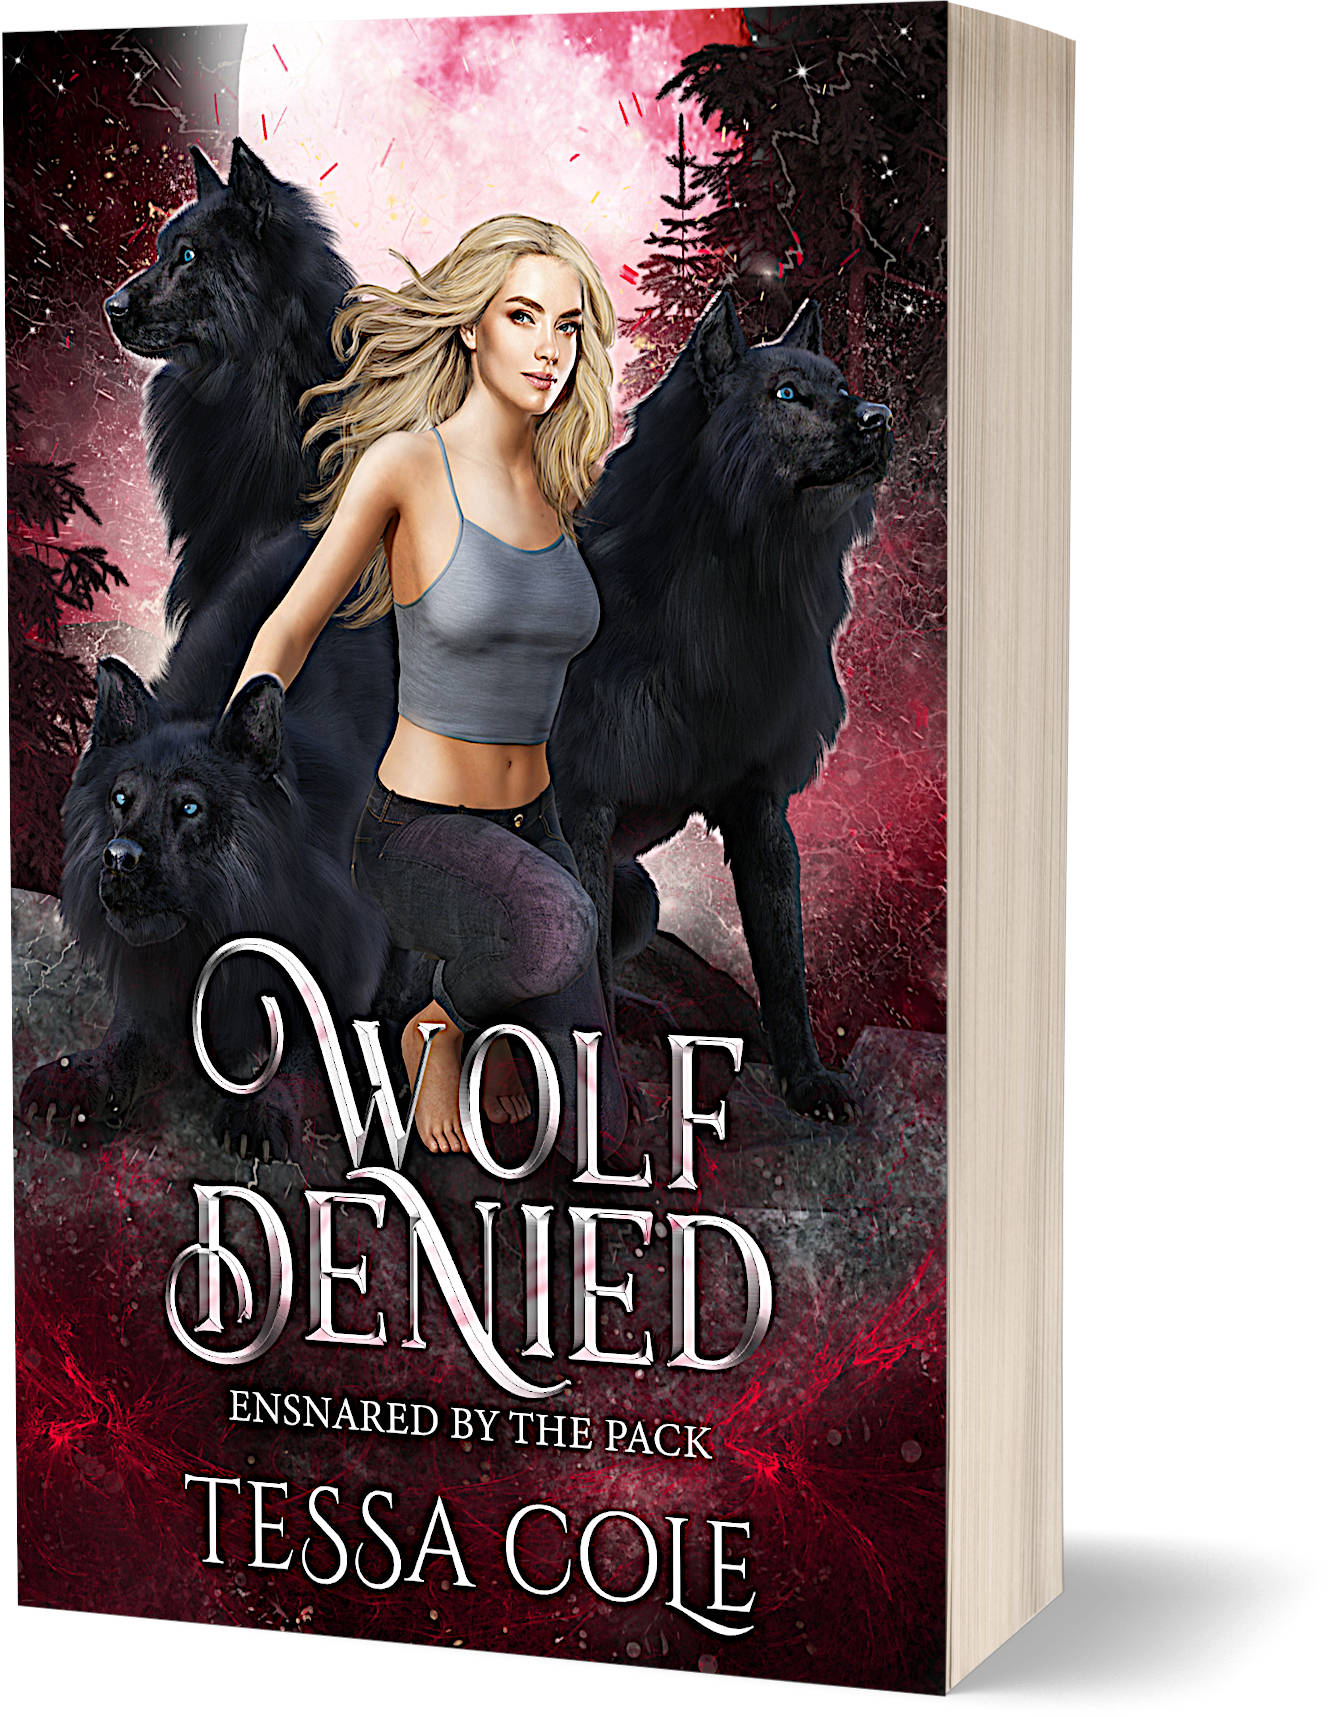 Wolf Denied, a reverse harem paranormal romance and the second book in the Ensnared by the Pack series by Tessa Cole